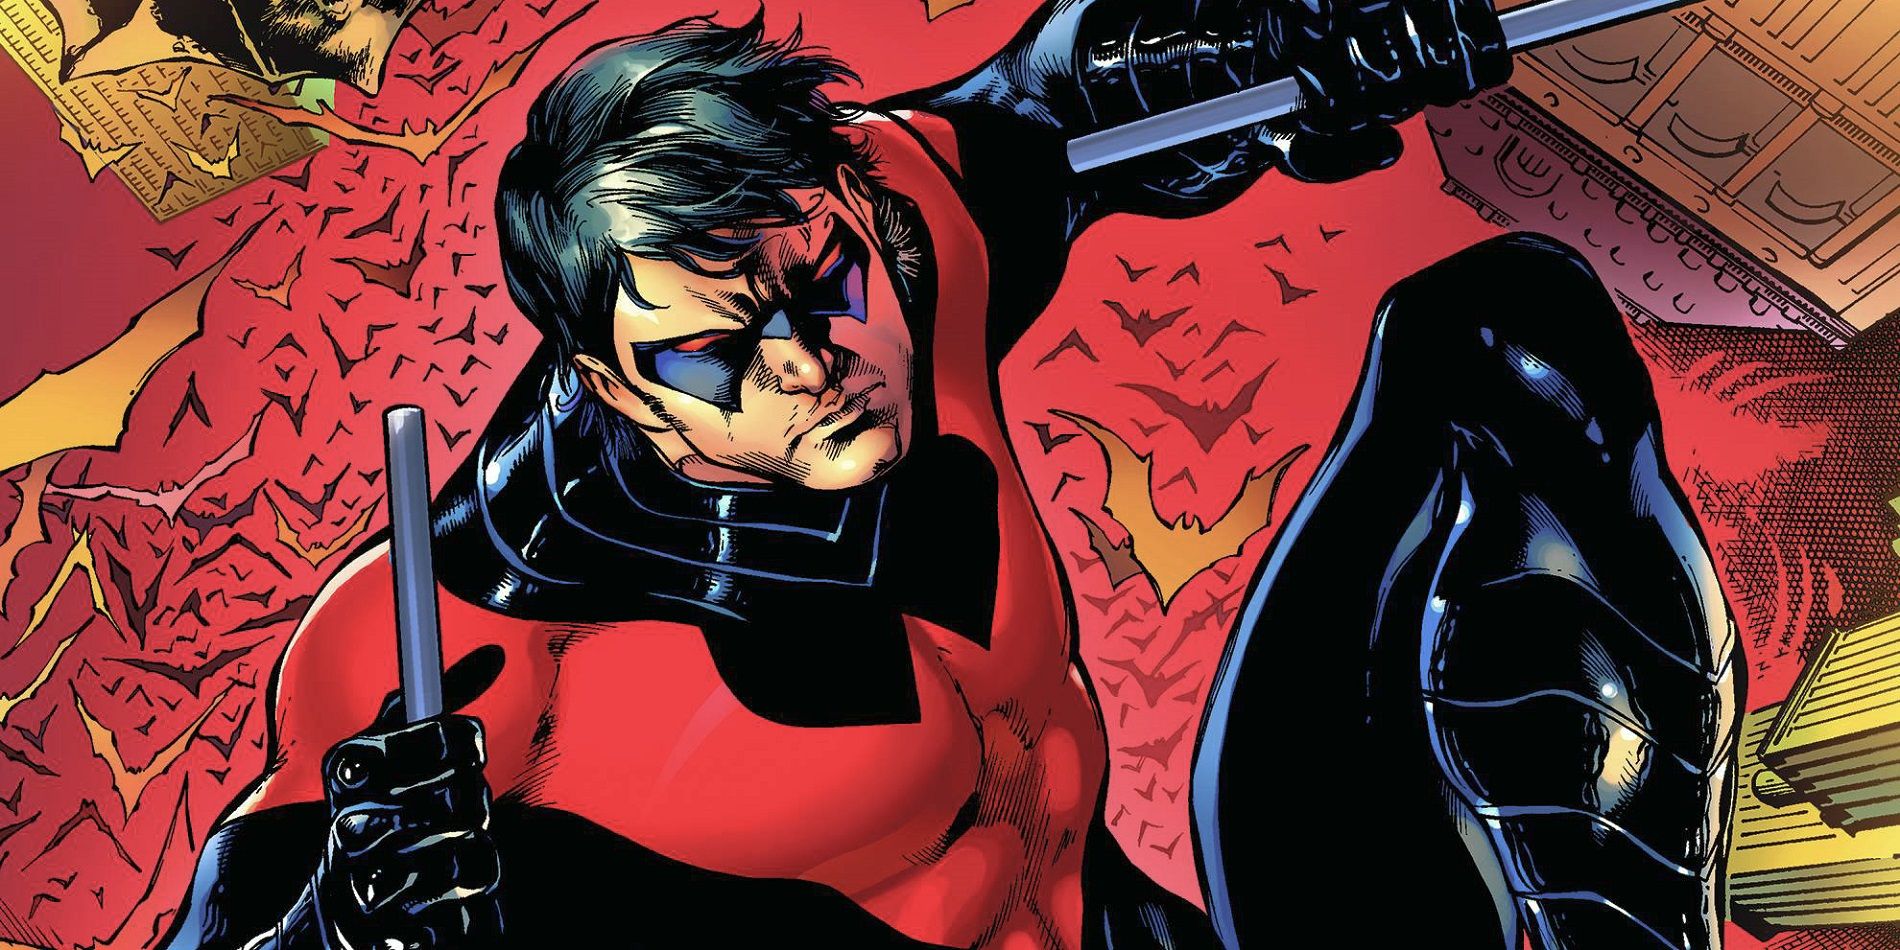 New 52 Nightwing from DC Comics